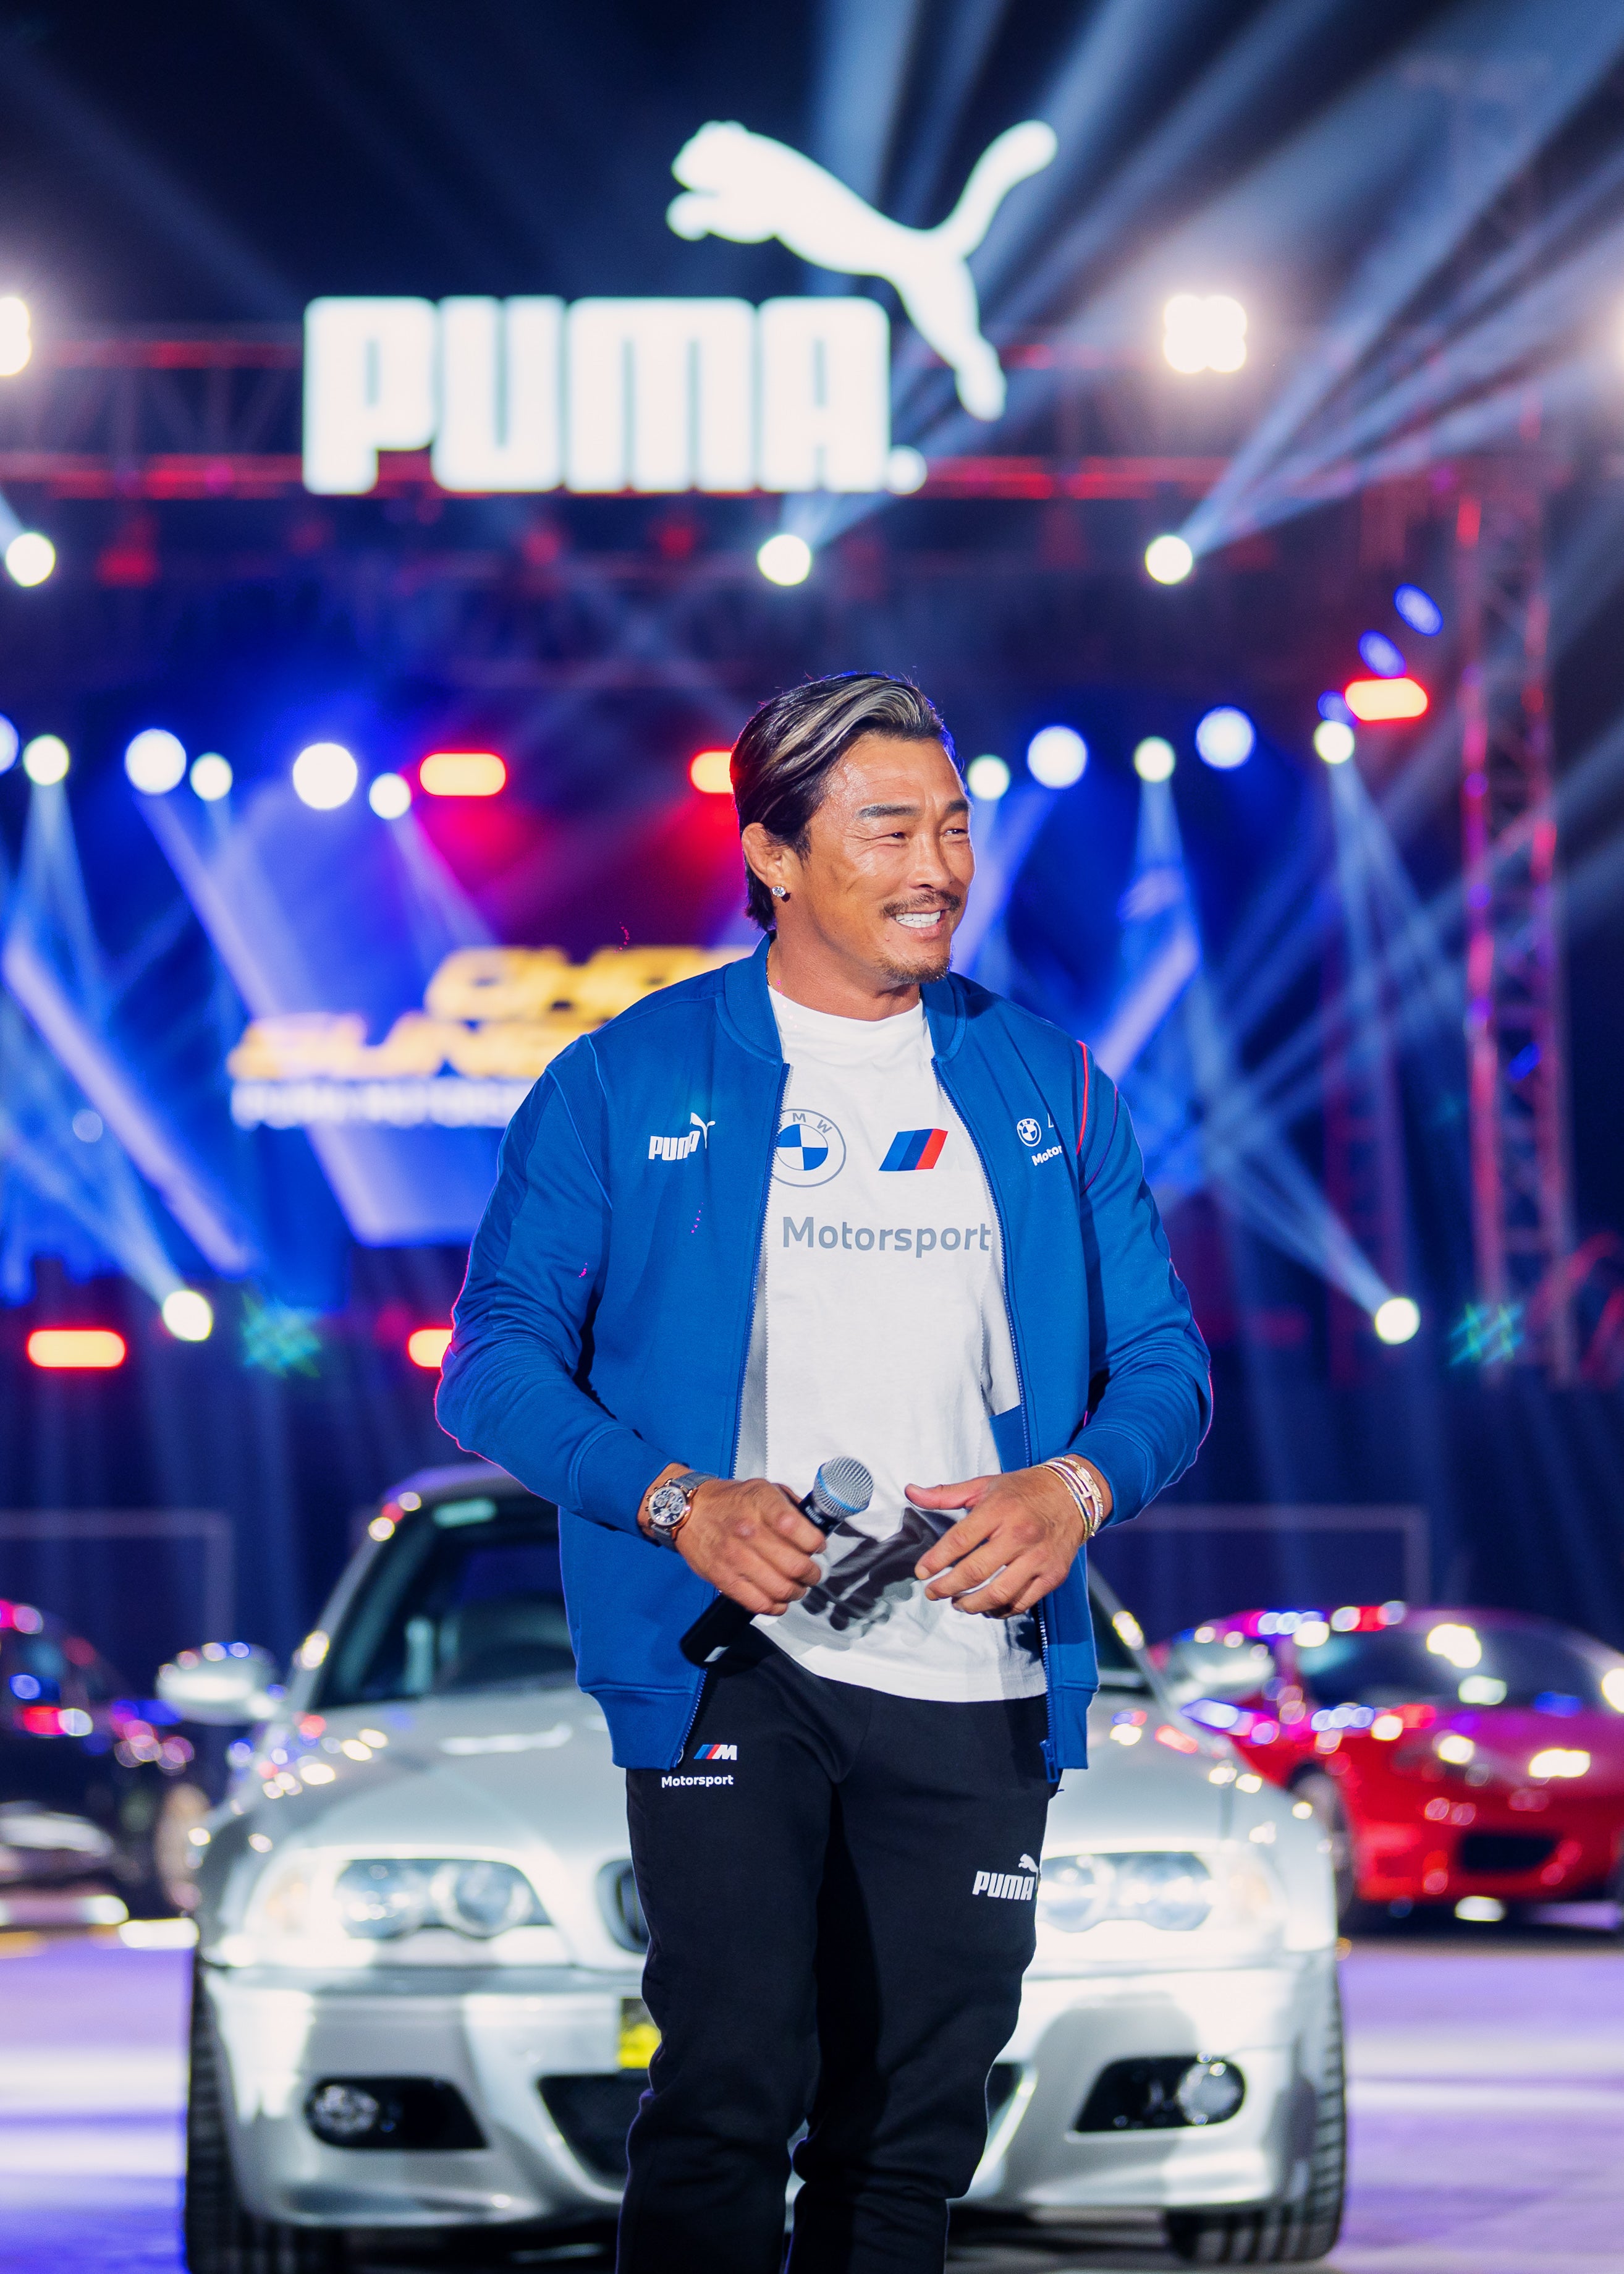 3. Choo Sung hoon a.k.a Sexyama makes his special appearance at the inaugural PUMA Car Club Event in SEA